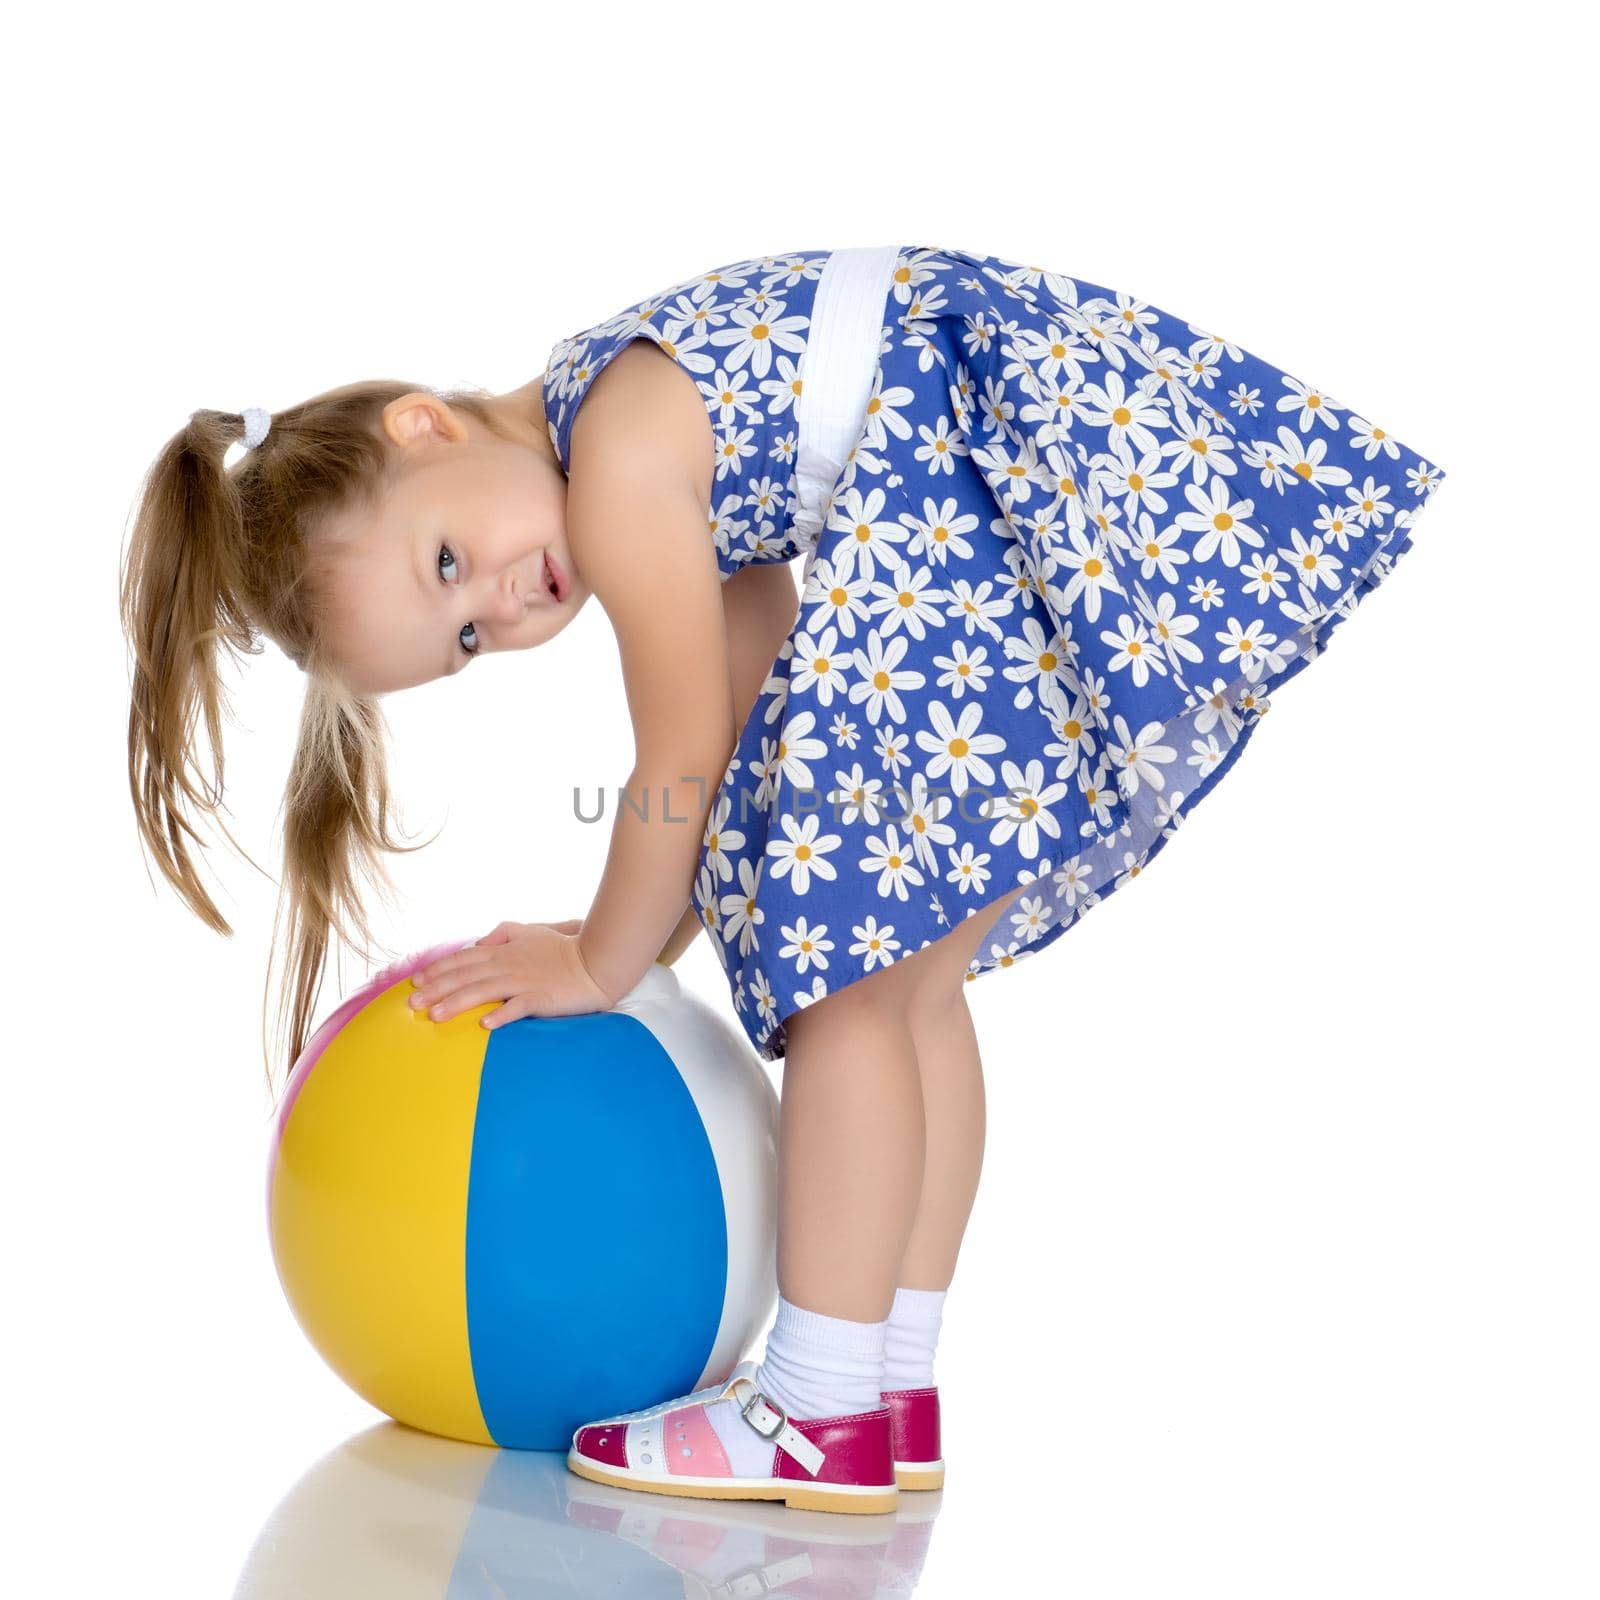 Little girl is playing with a ball by kolesnikov_studio